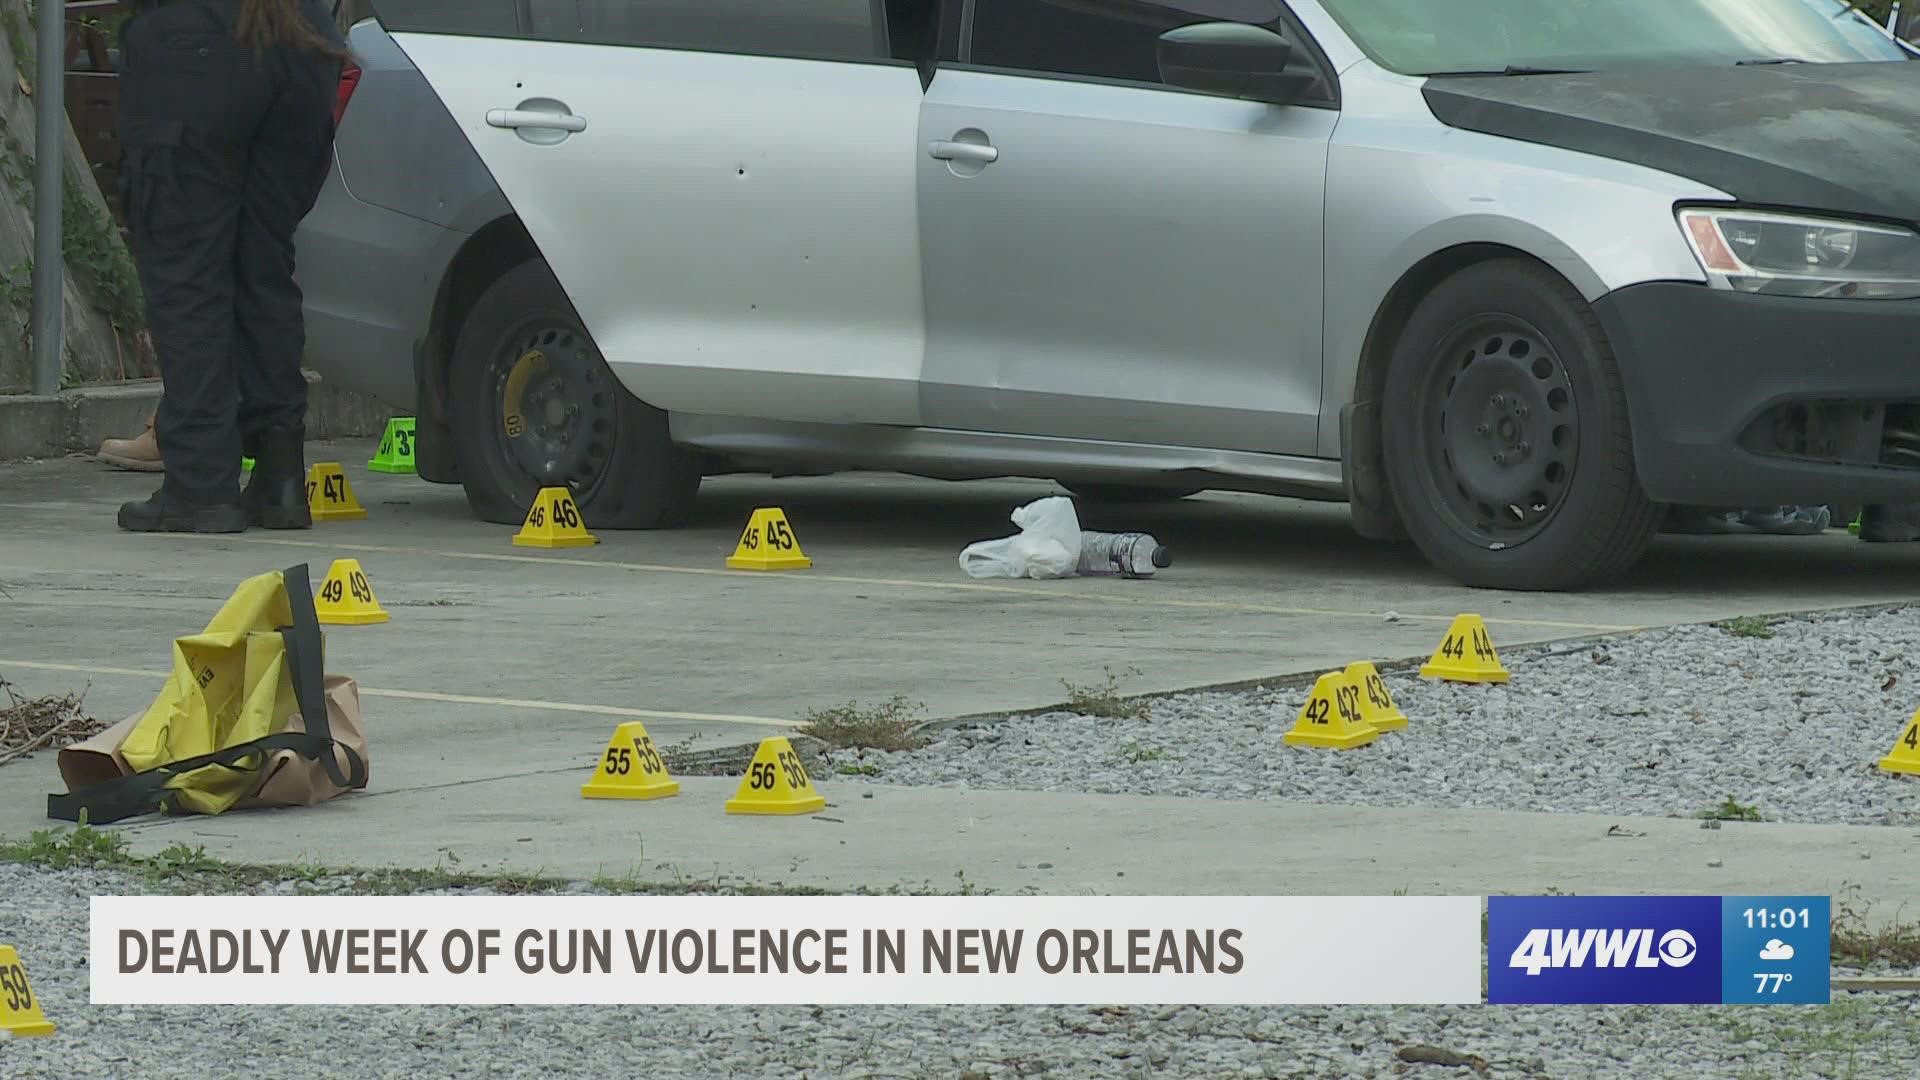 Families plead for an end to violence after deadly week of shootings in New Orleans